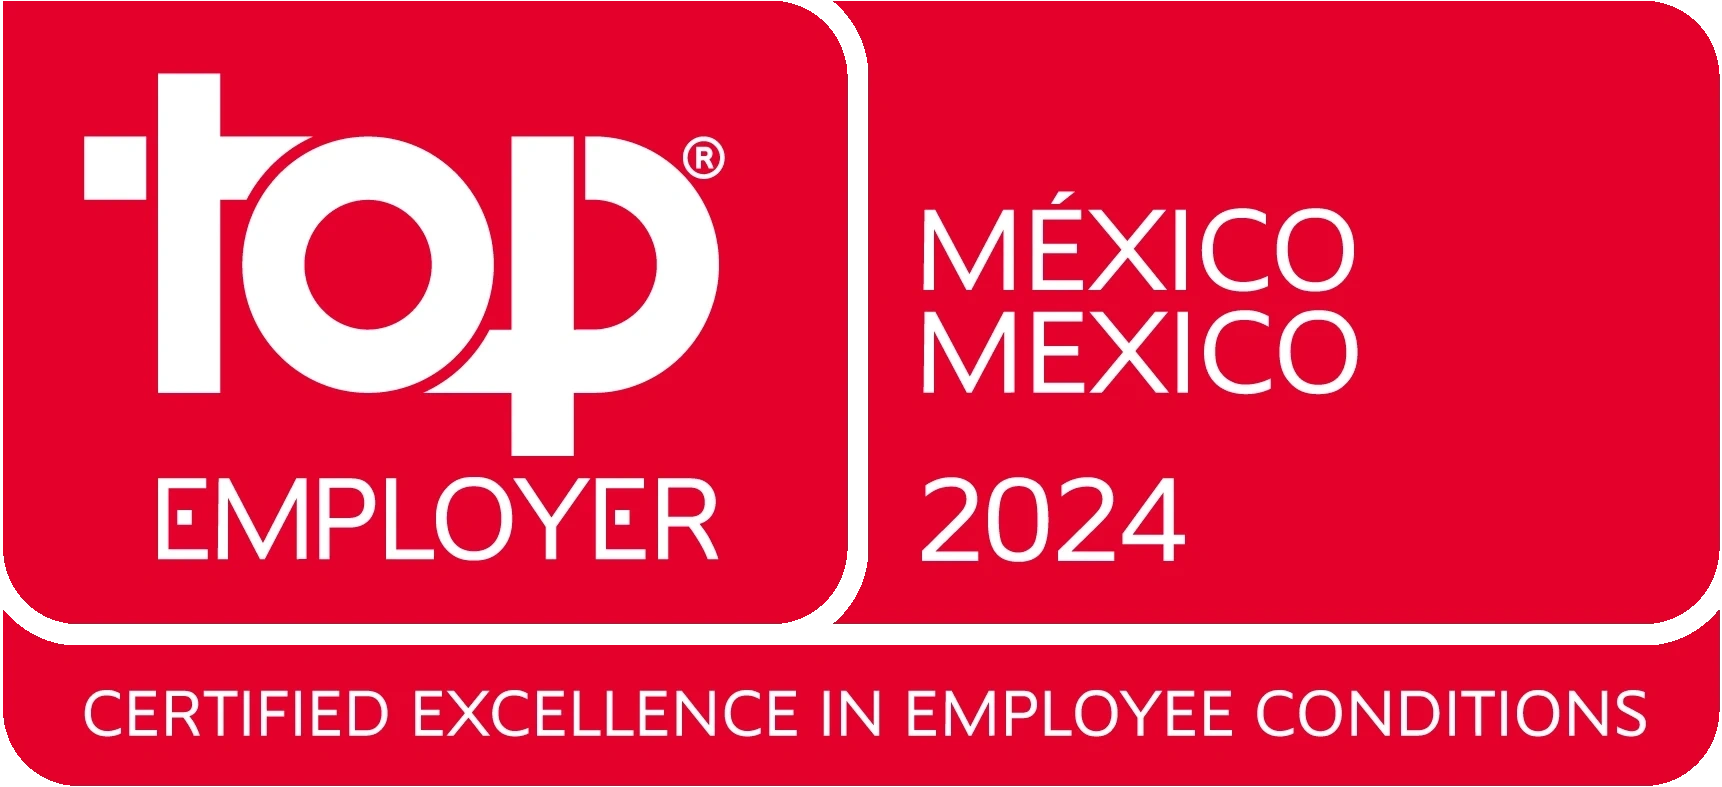 Top Employer in Mexico